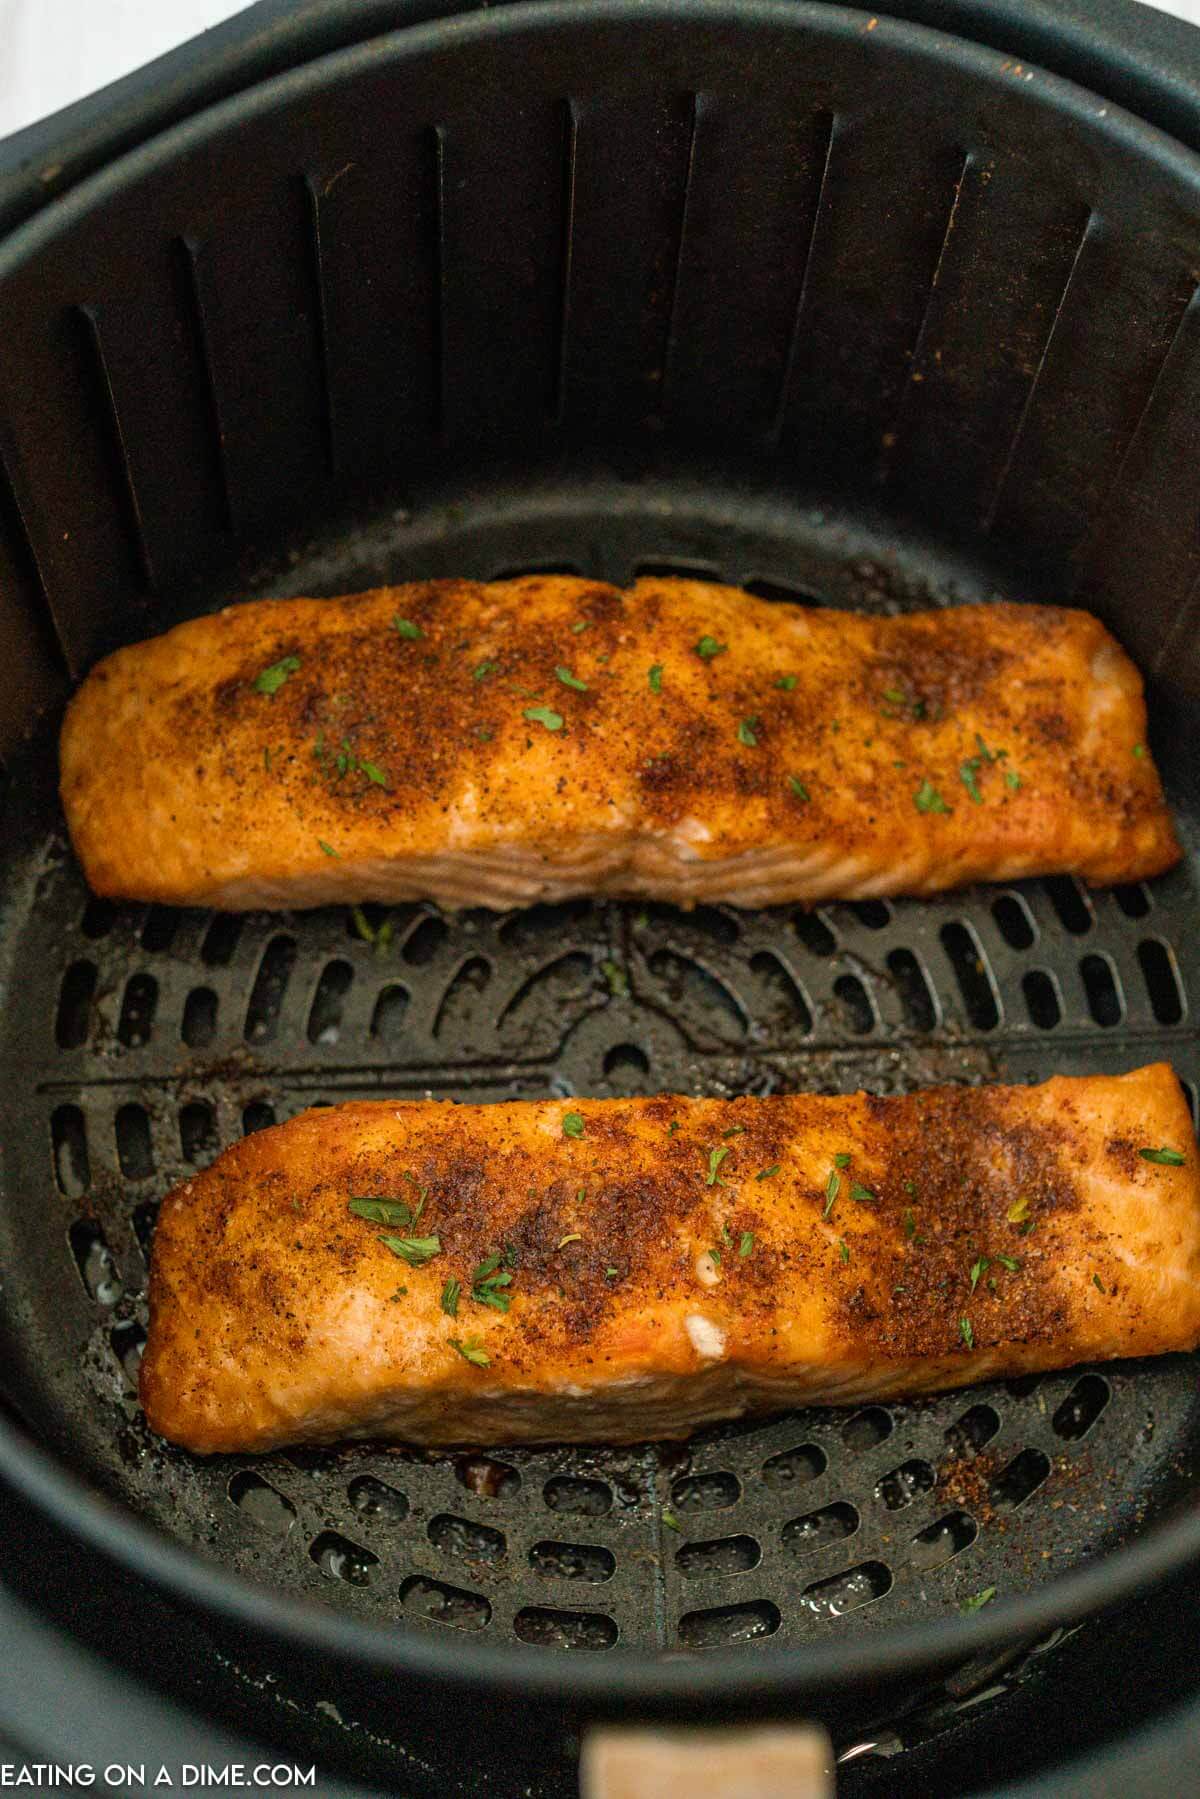 Salmon in the air fryer basket